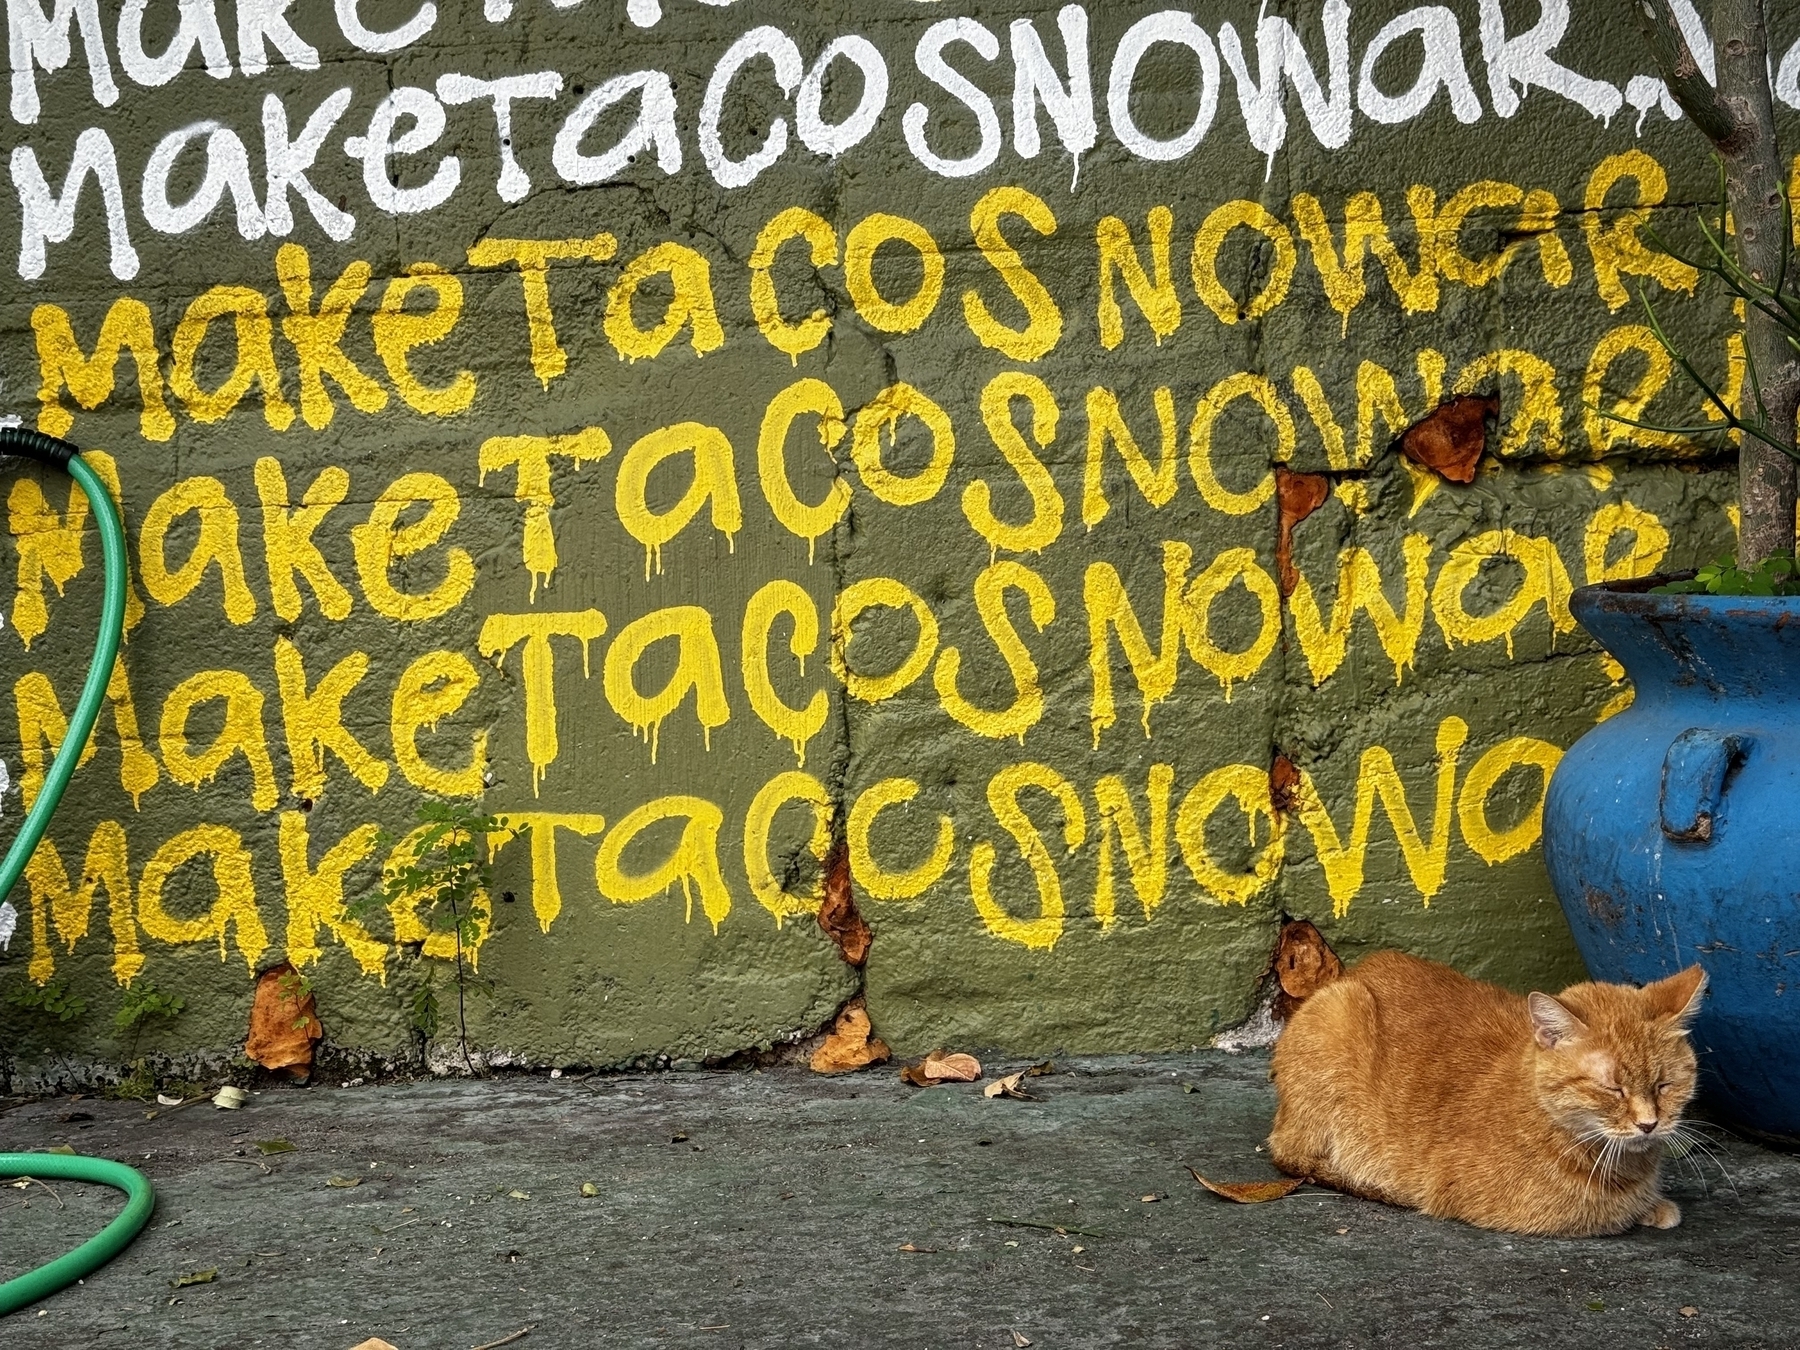 Shot of a wall with make tacos no war in white spray paint then yellow spray paint. An orange cat is on the bottom right of frame lying down on concrete  